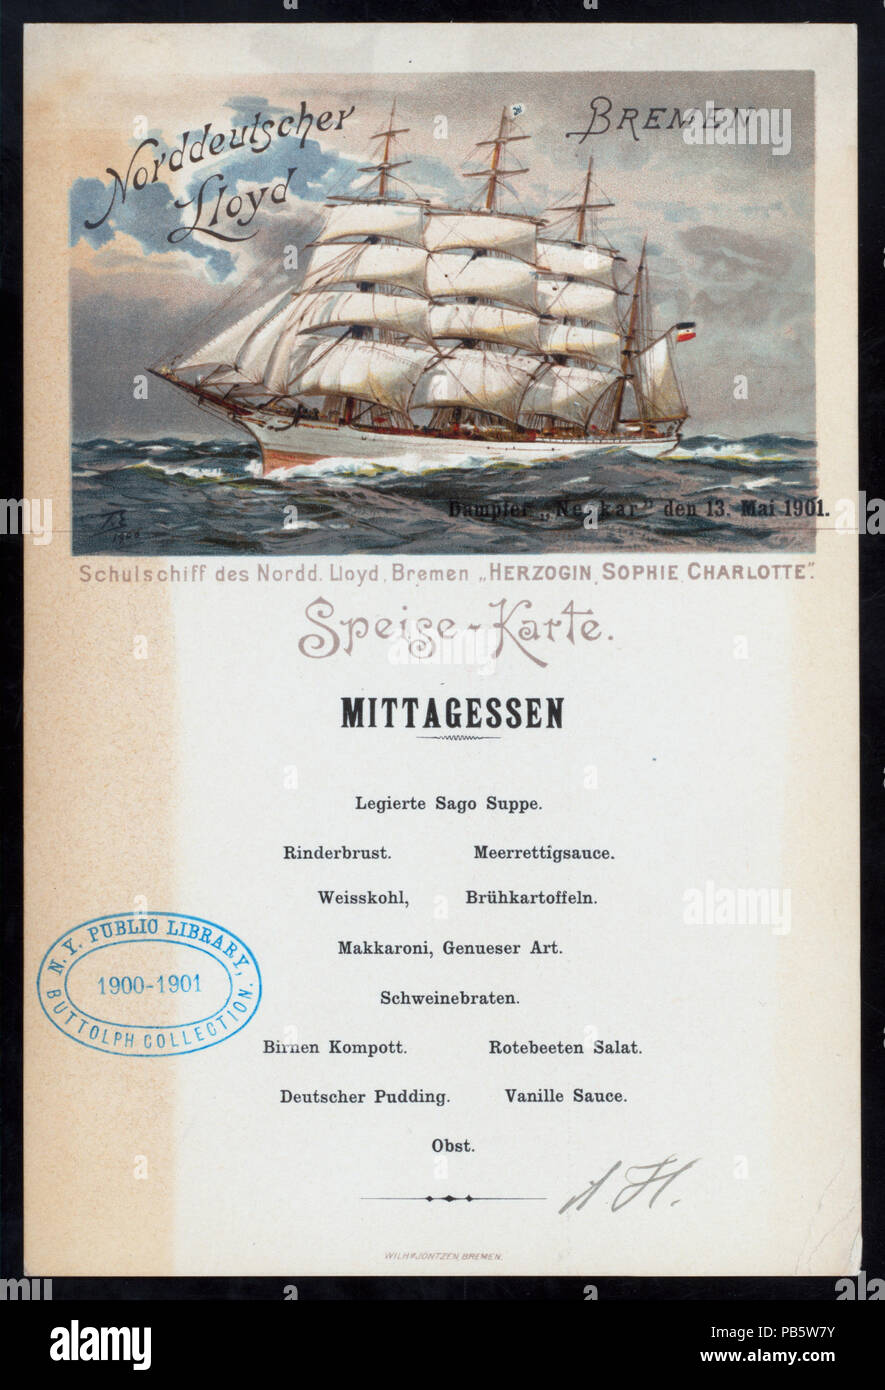 1043 MIDDAY MEAL (held by) NORDDEUTSCHER LLOYD BREMEN (at) EN ROUTE ABOARD DAMPFER NECKER (SS;) (NYPL Hades-276327-471391) Stock Photo